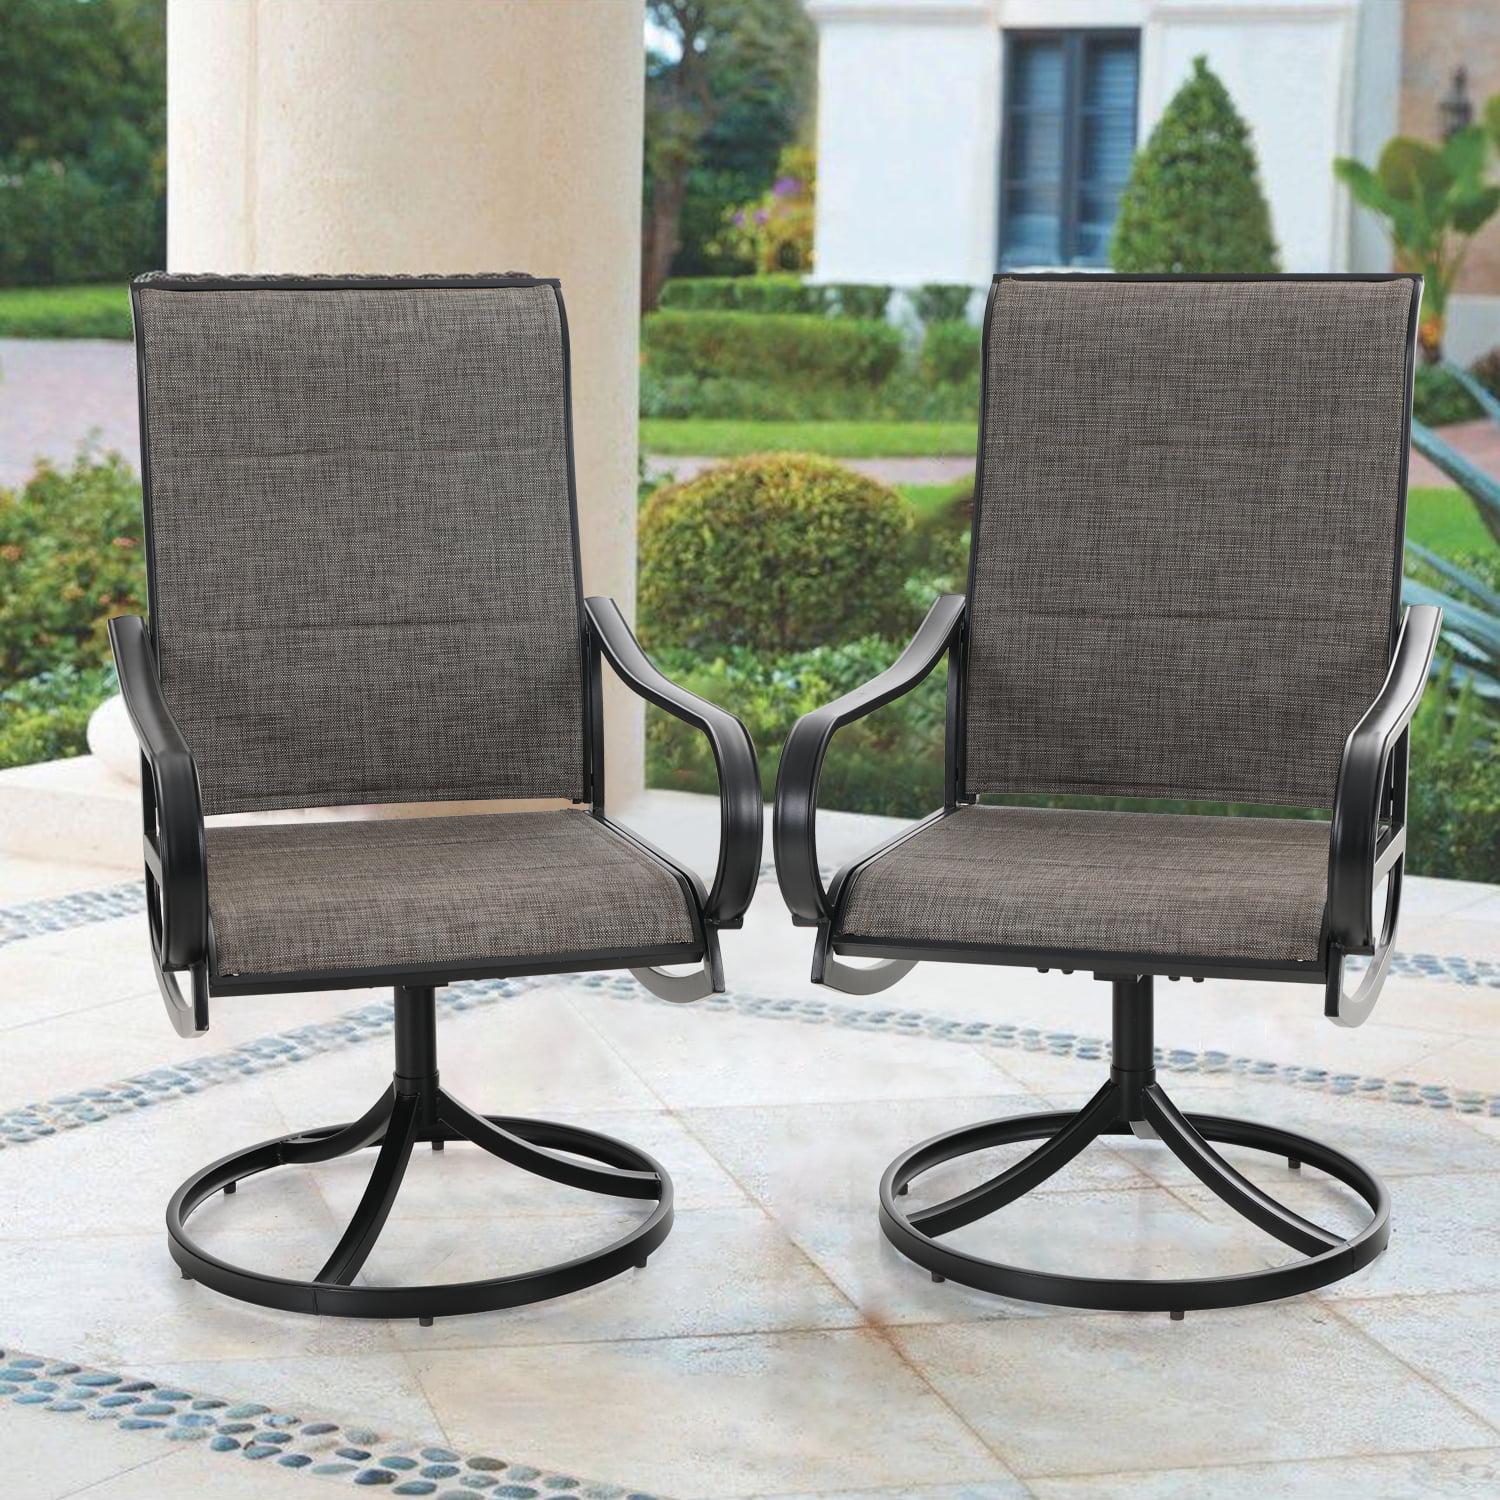 MF Studio Outdoor Dining Chairs Patio Padded Chairs 360°Swivel Design ...